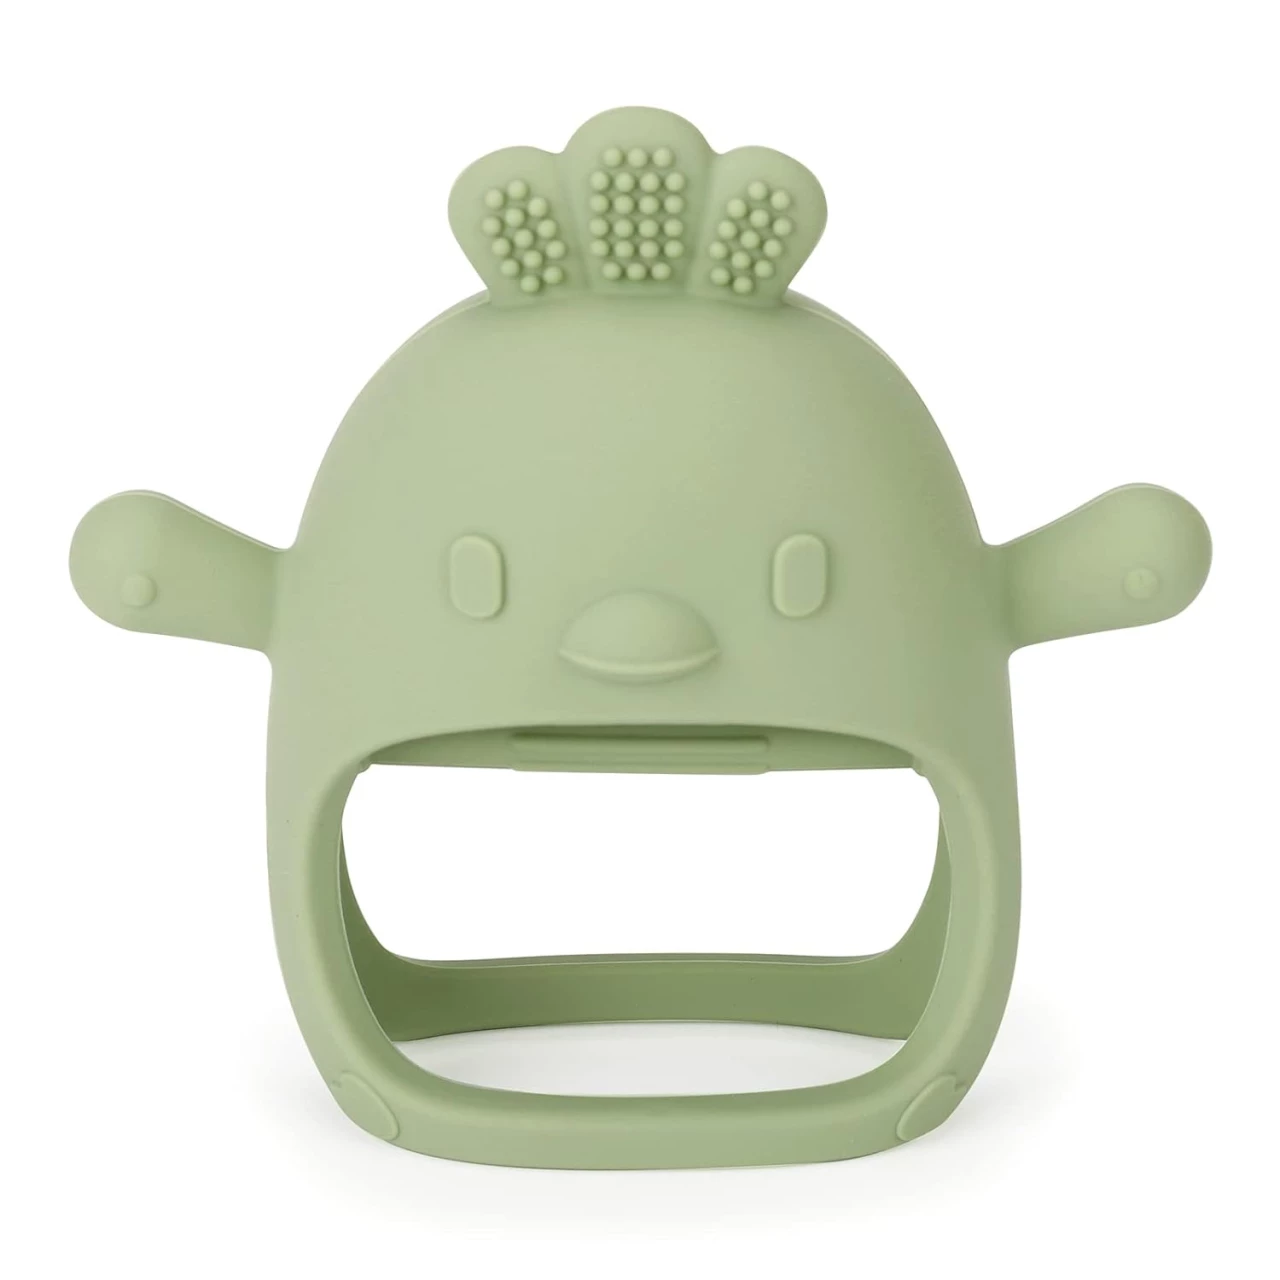 Socub Silicone Baby Teether Toy